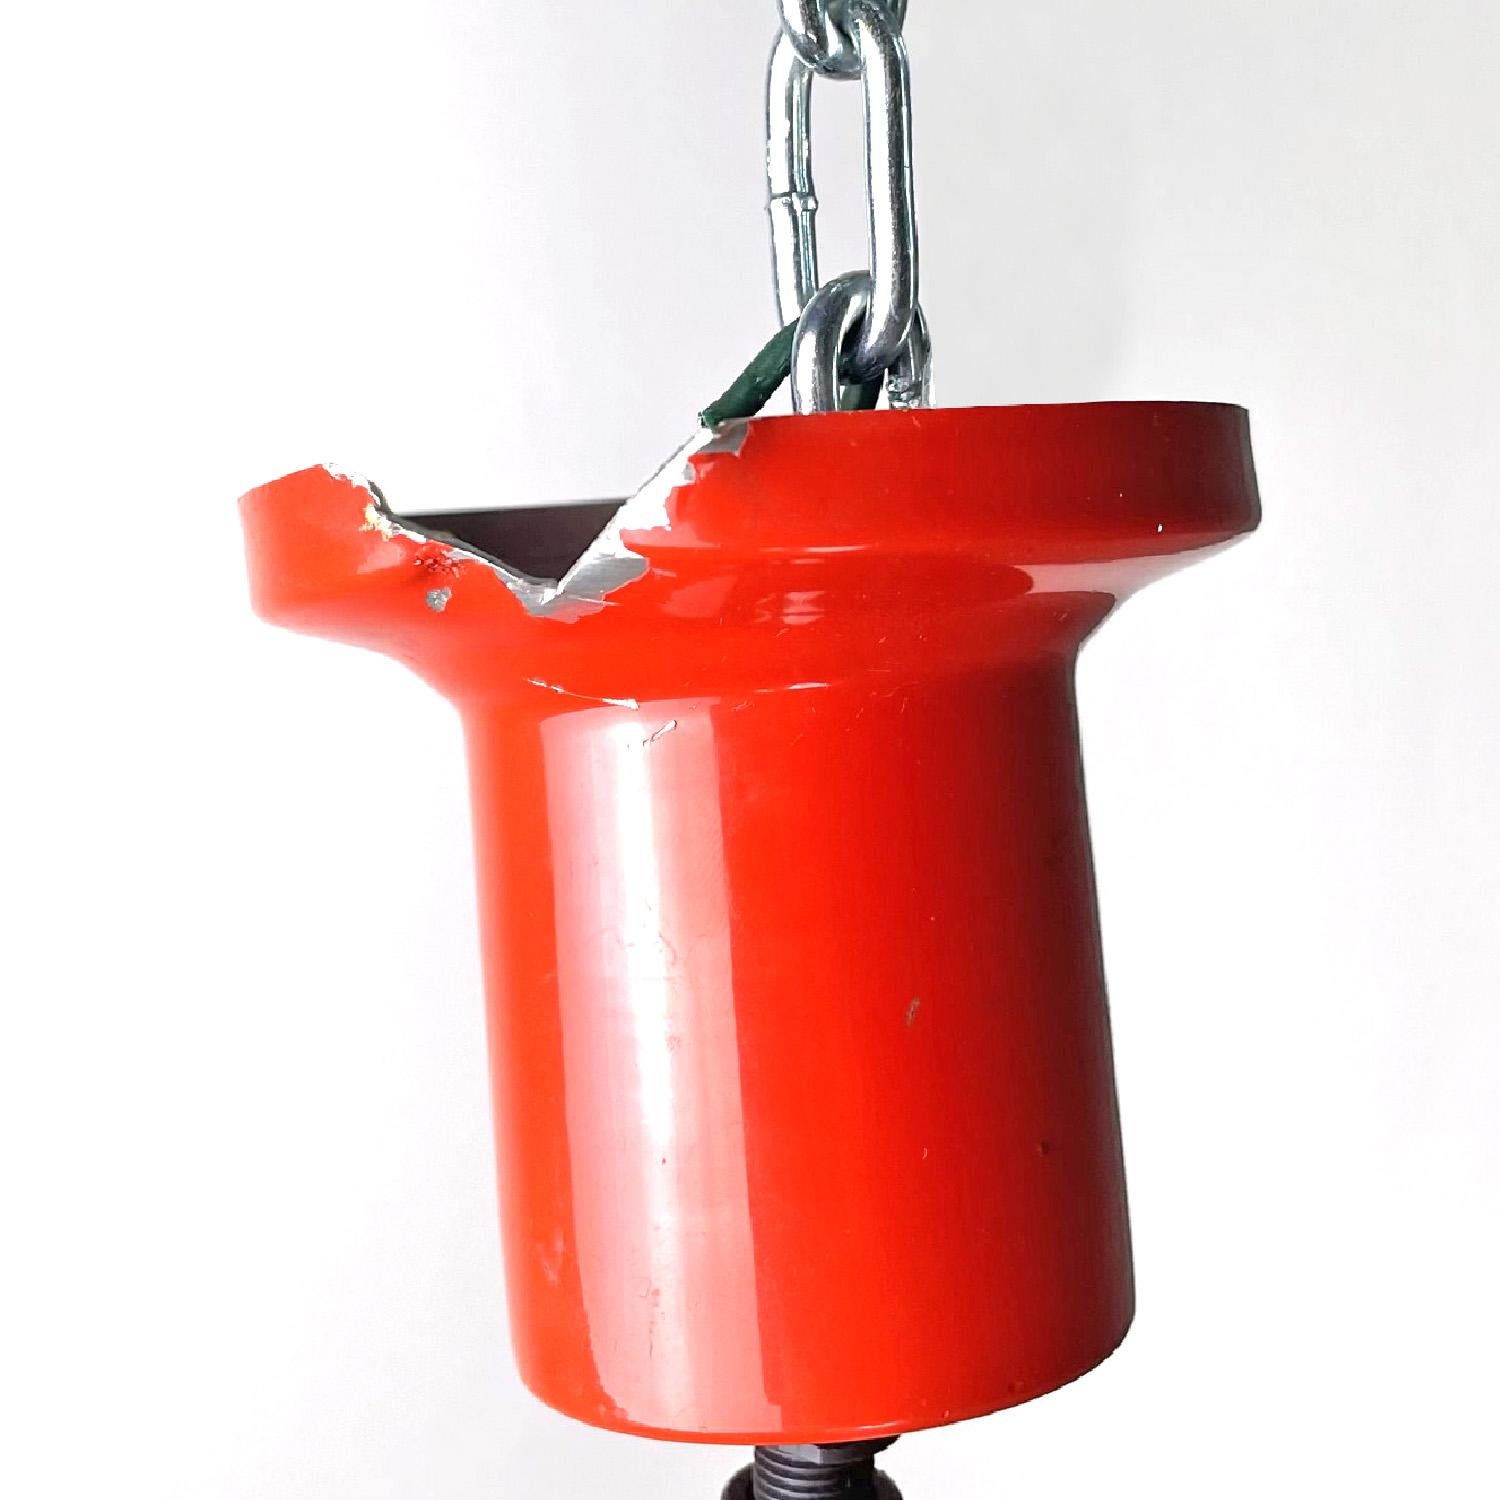 Italian red chandelier Lampara by Roberto Menghi for Fontana Arte, 1960s For Sale 6